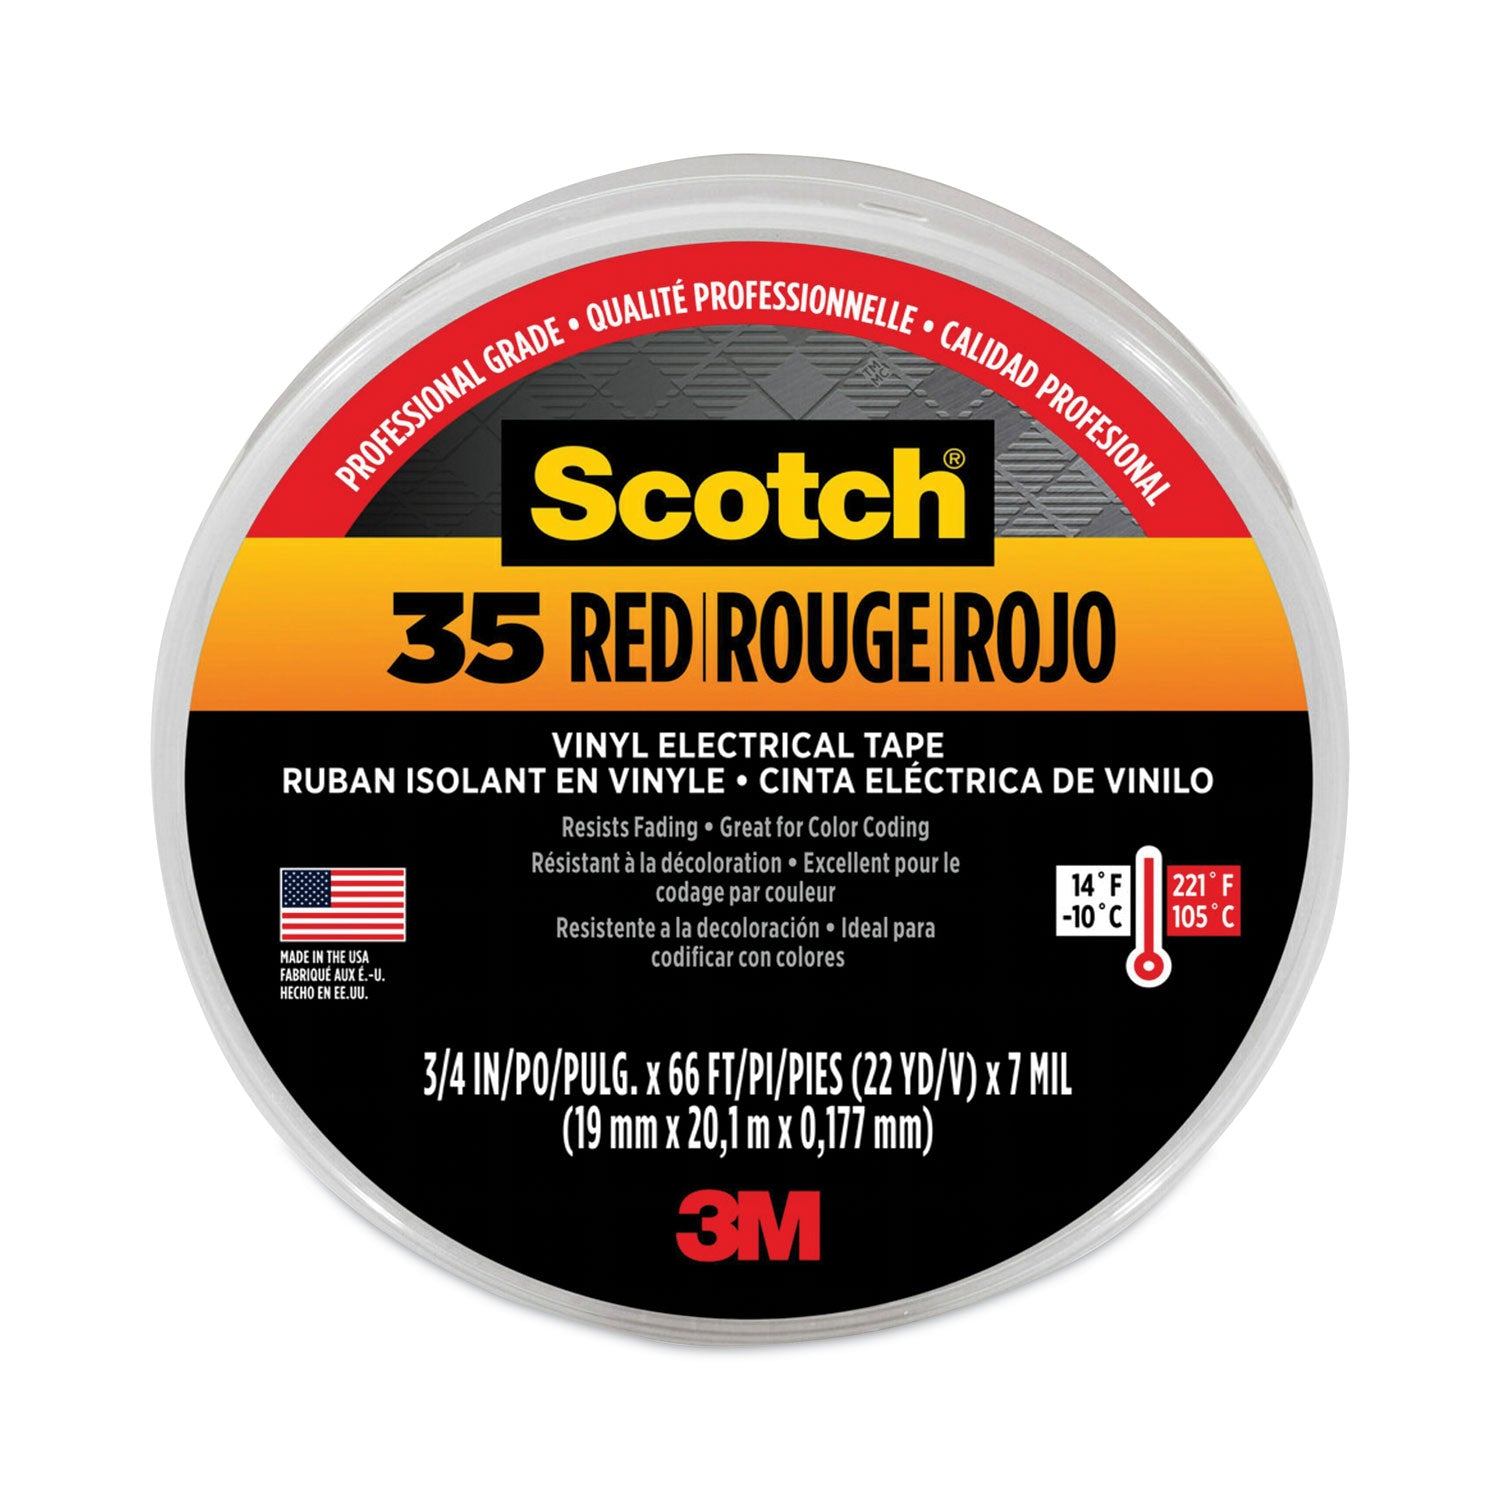 Scotch 35 Vinyl Electrical Color Coding Tape, 3" Core, 0.75" x 66 ft, Red - 